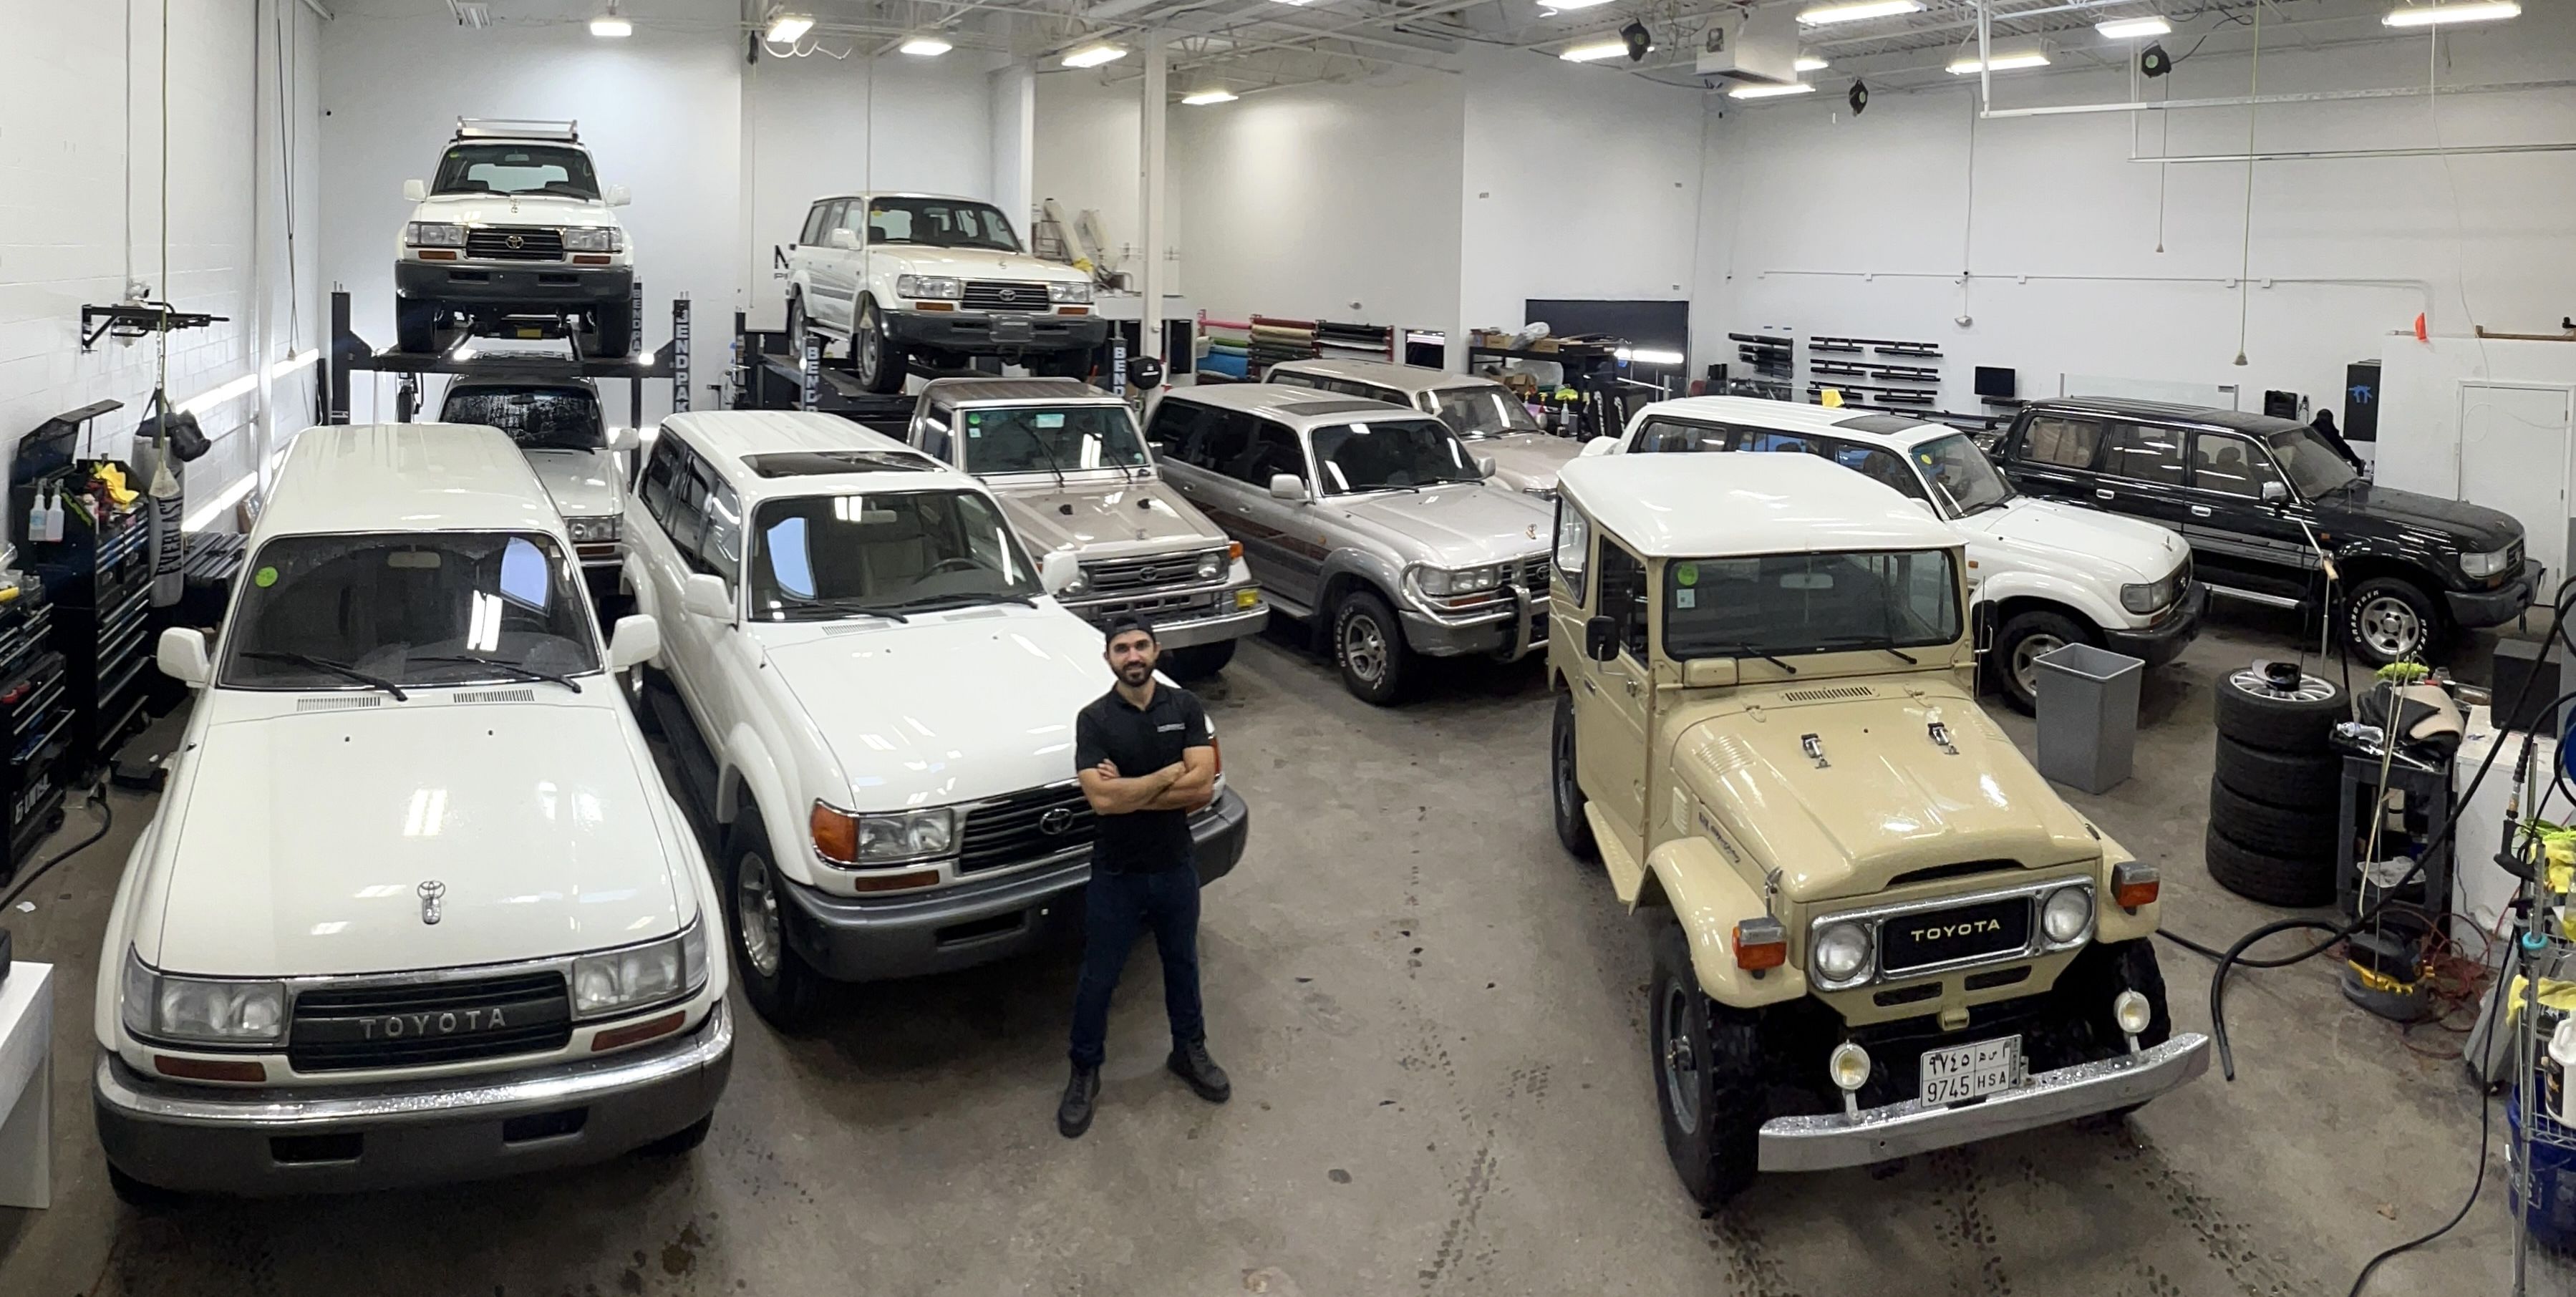 Michigan Man Has Collected 24 Land Cruisers in Just Over a Year